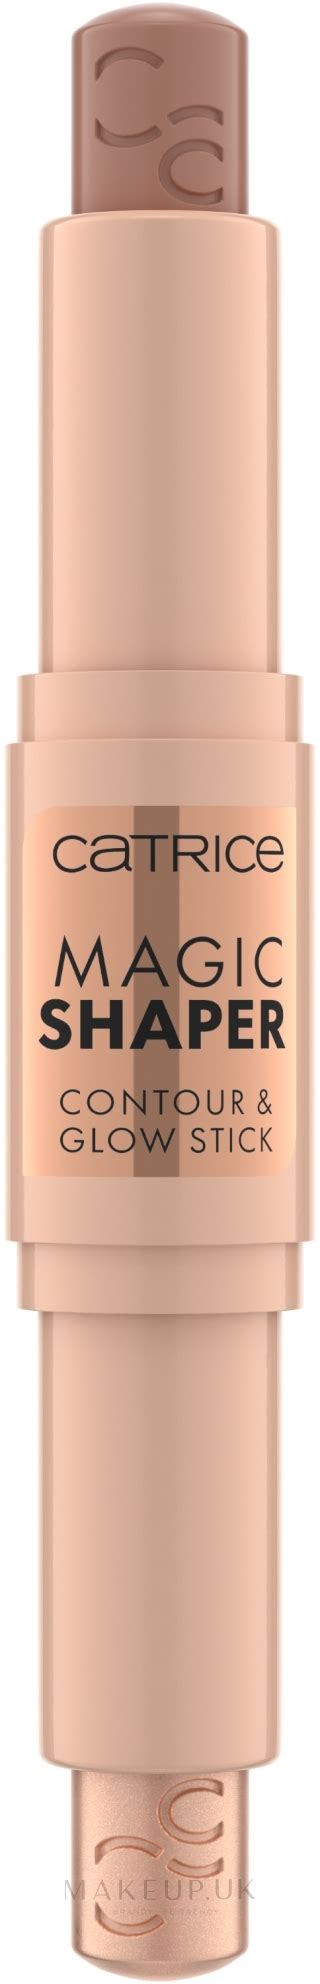 How to Create a Natural-looking Contour with a Magi Wand Contour